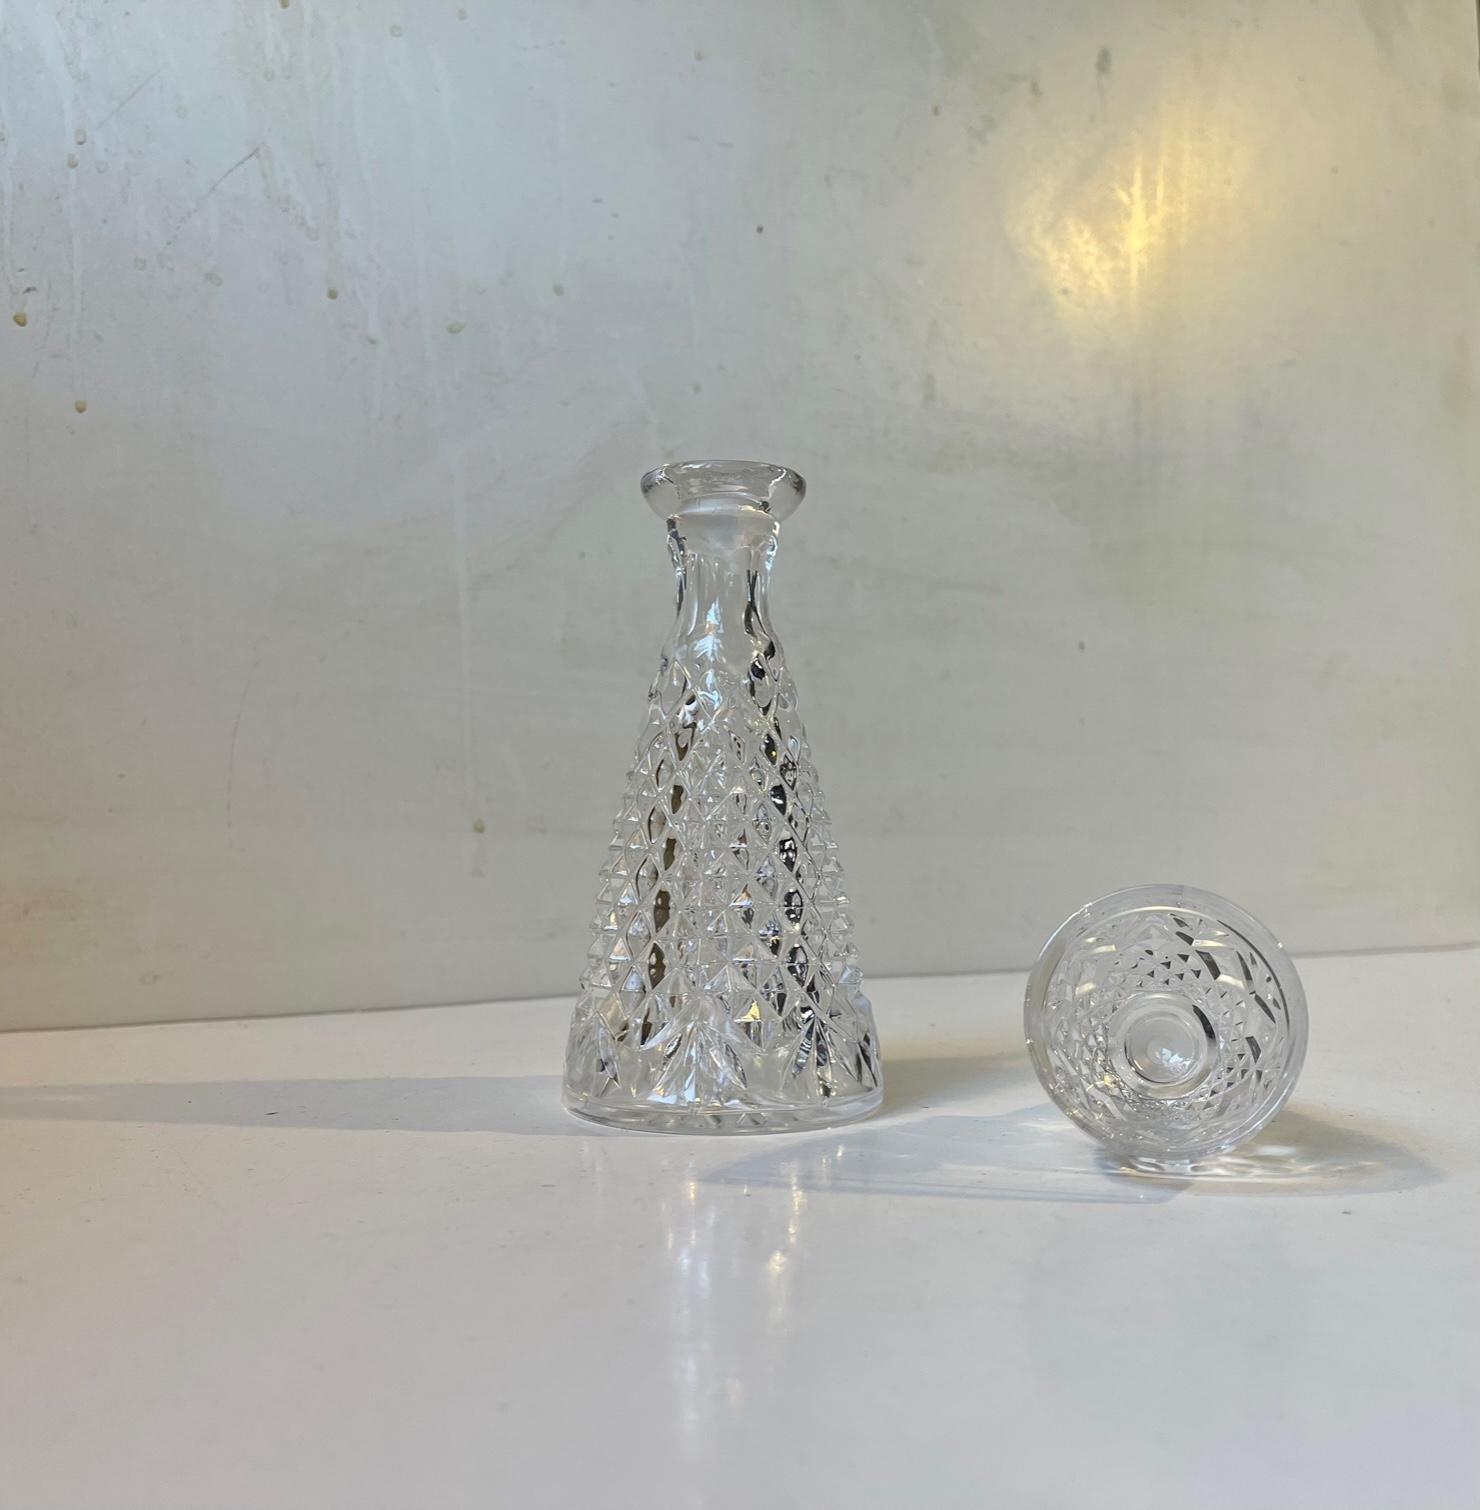 Small diablo-shaped crystal decanter cut with diamond patterns and set a stopper that is also a 6 cl glass. In the Czech Republic these are commonly called 'I drink solo'. It has a capacity of roughly 0.25 liter. Measurements: H: 19,5 cm, Diameter: